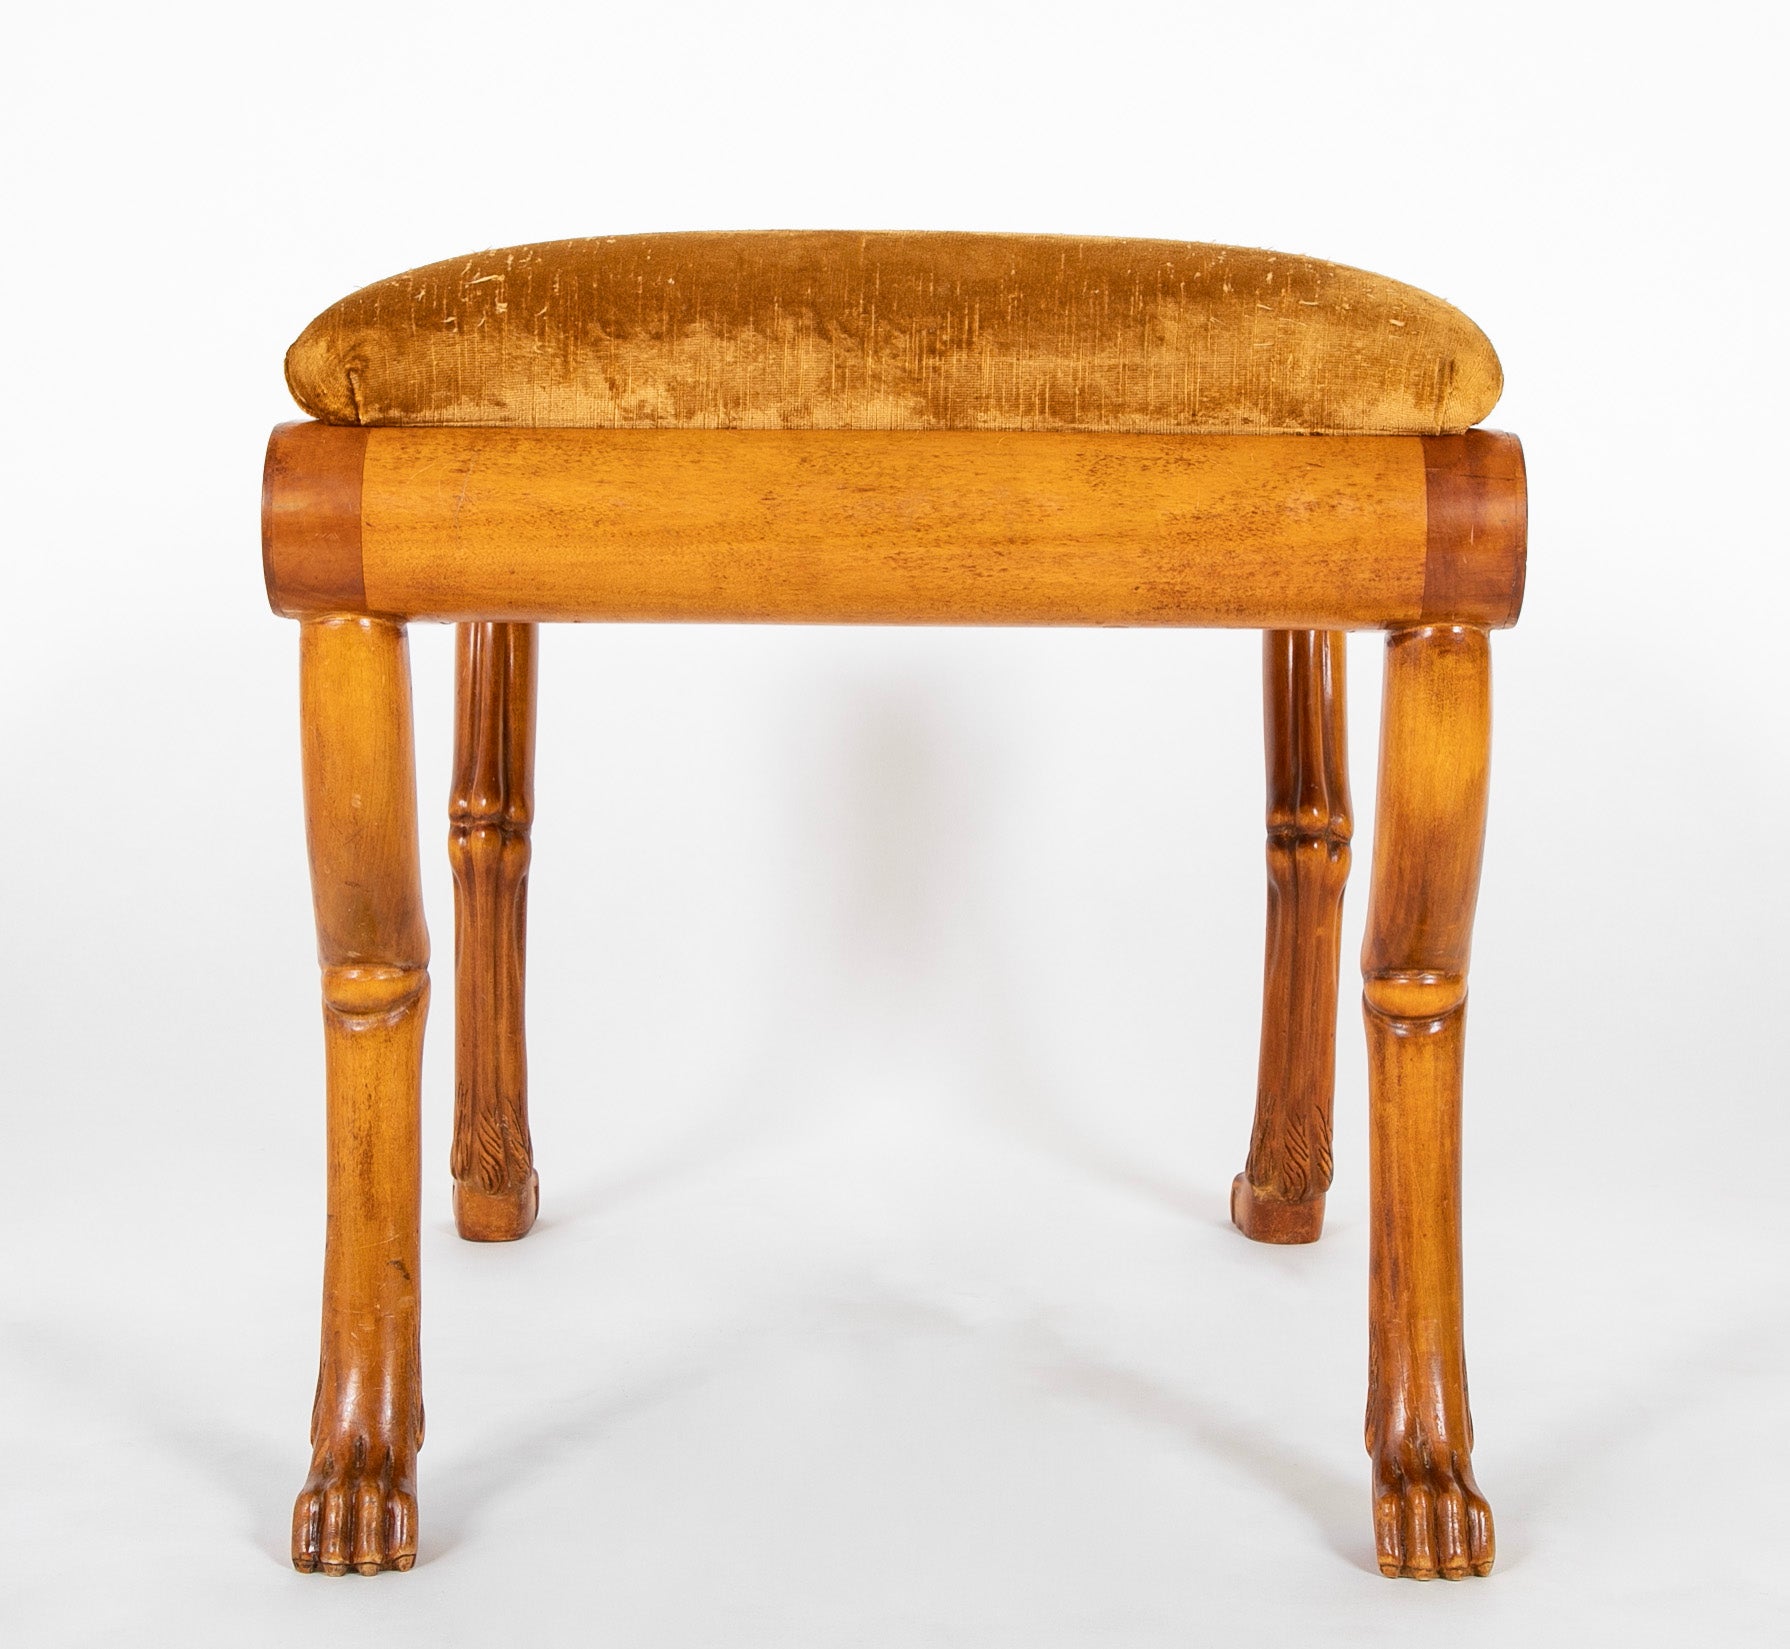 19th Century English Paw Foot Bench or Stool